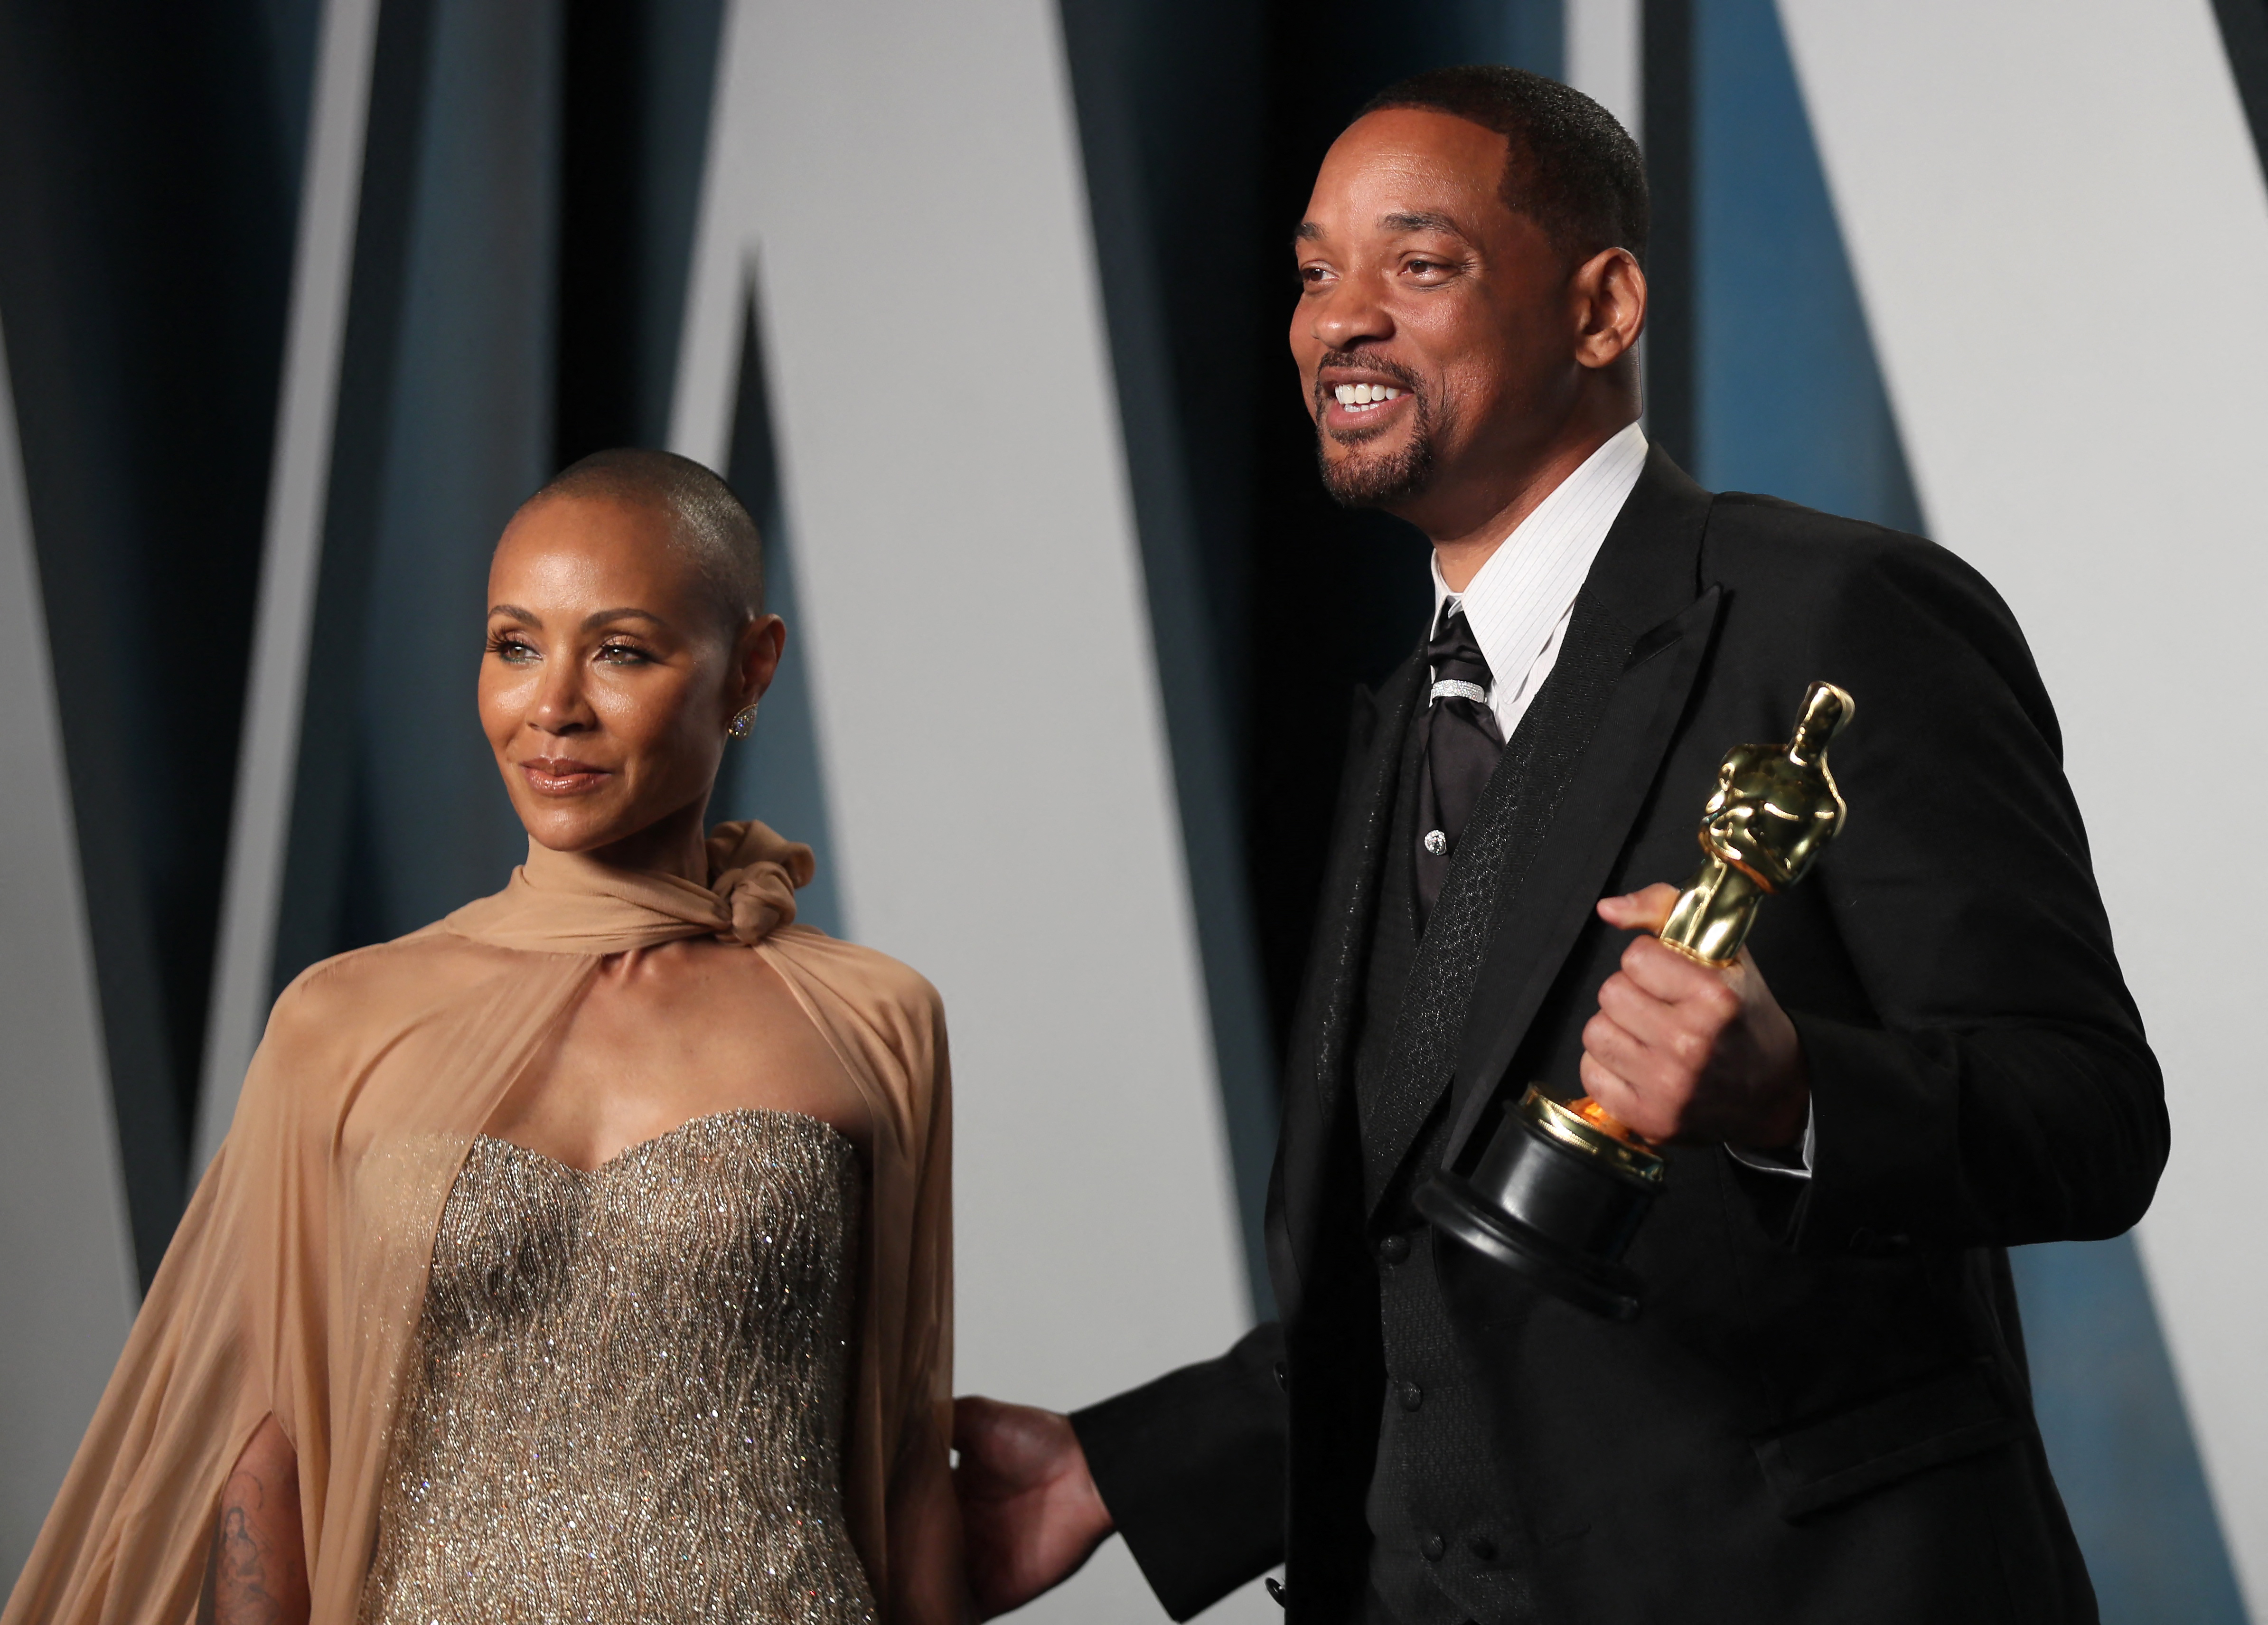 Jada Pinkett Smith says after Oscar slap she decided to stand by